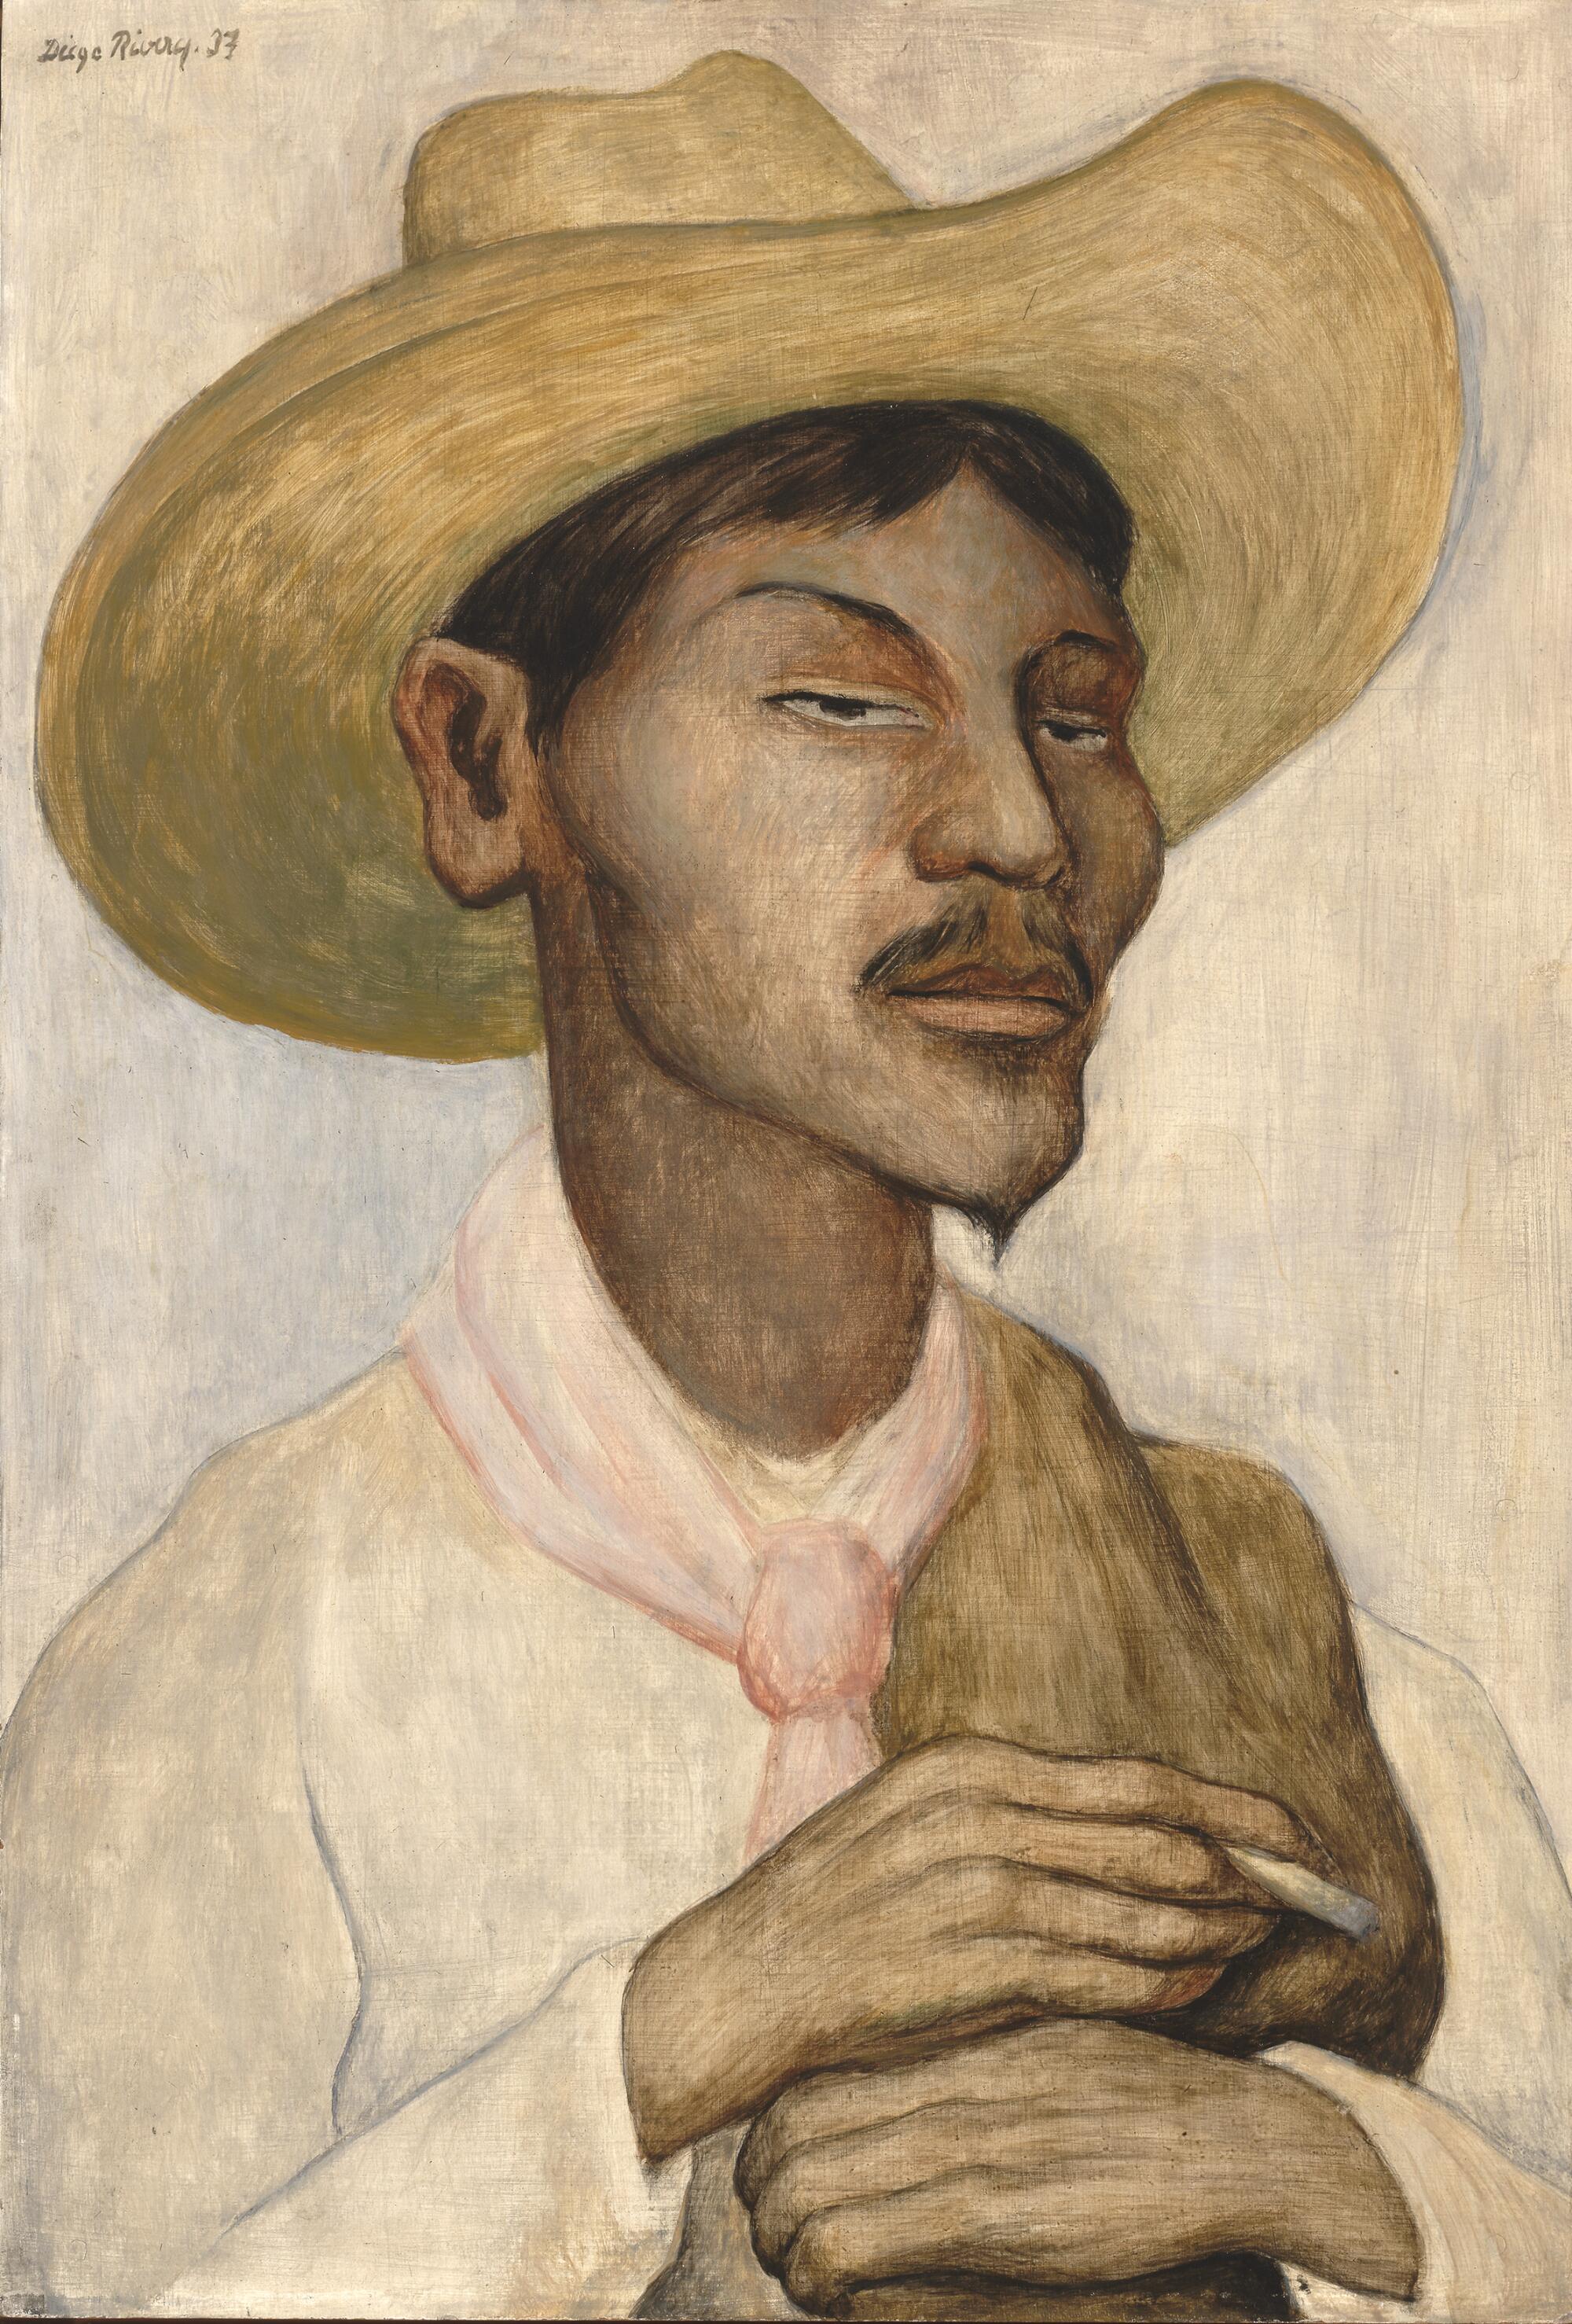 A painting by Diego Rivera shows an Indigenous man in the clothes of a campesino smoking a cigarette